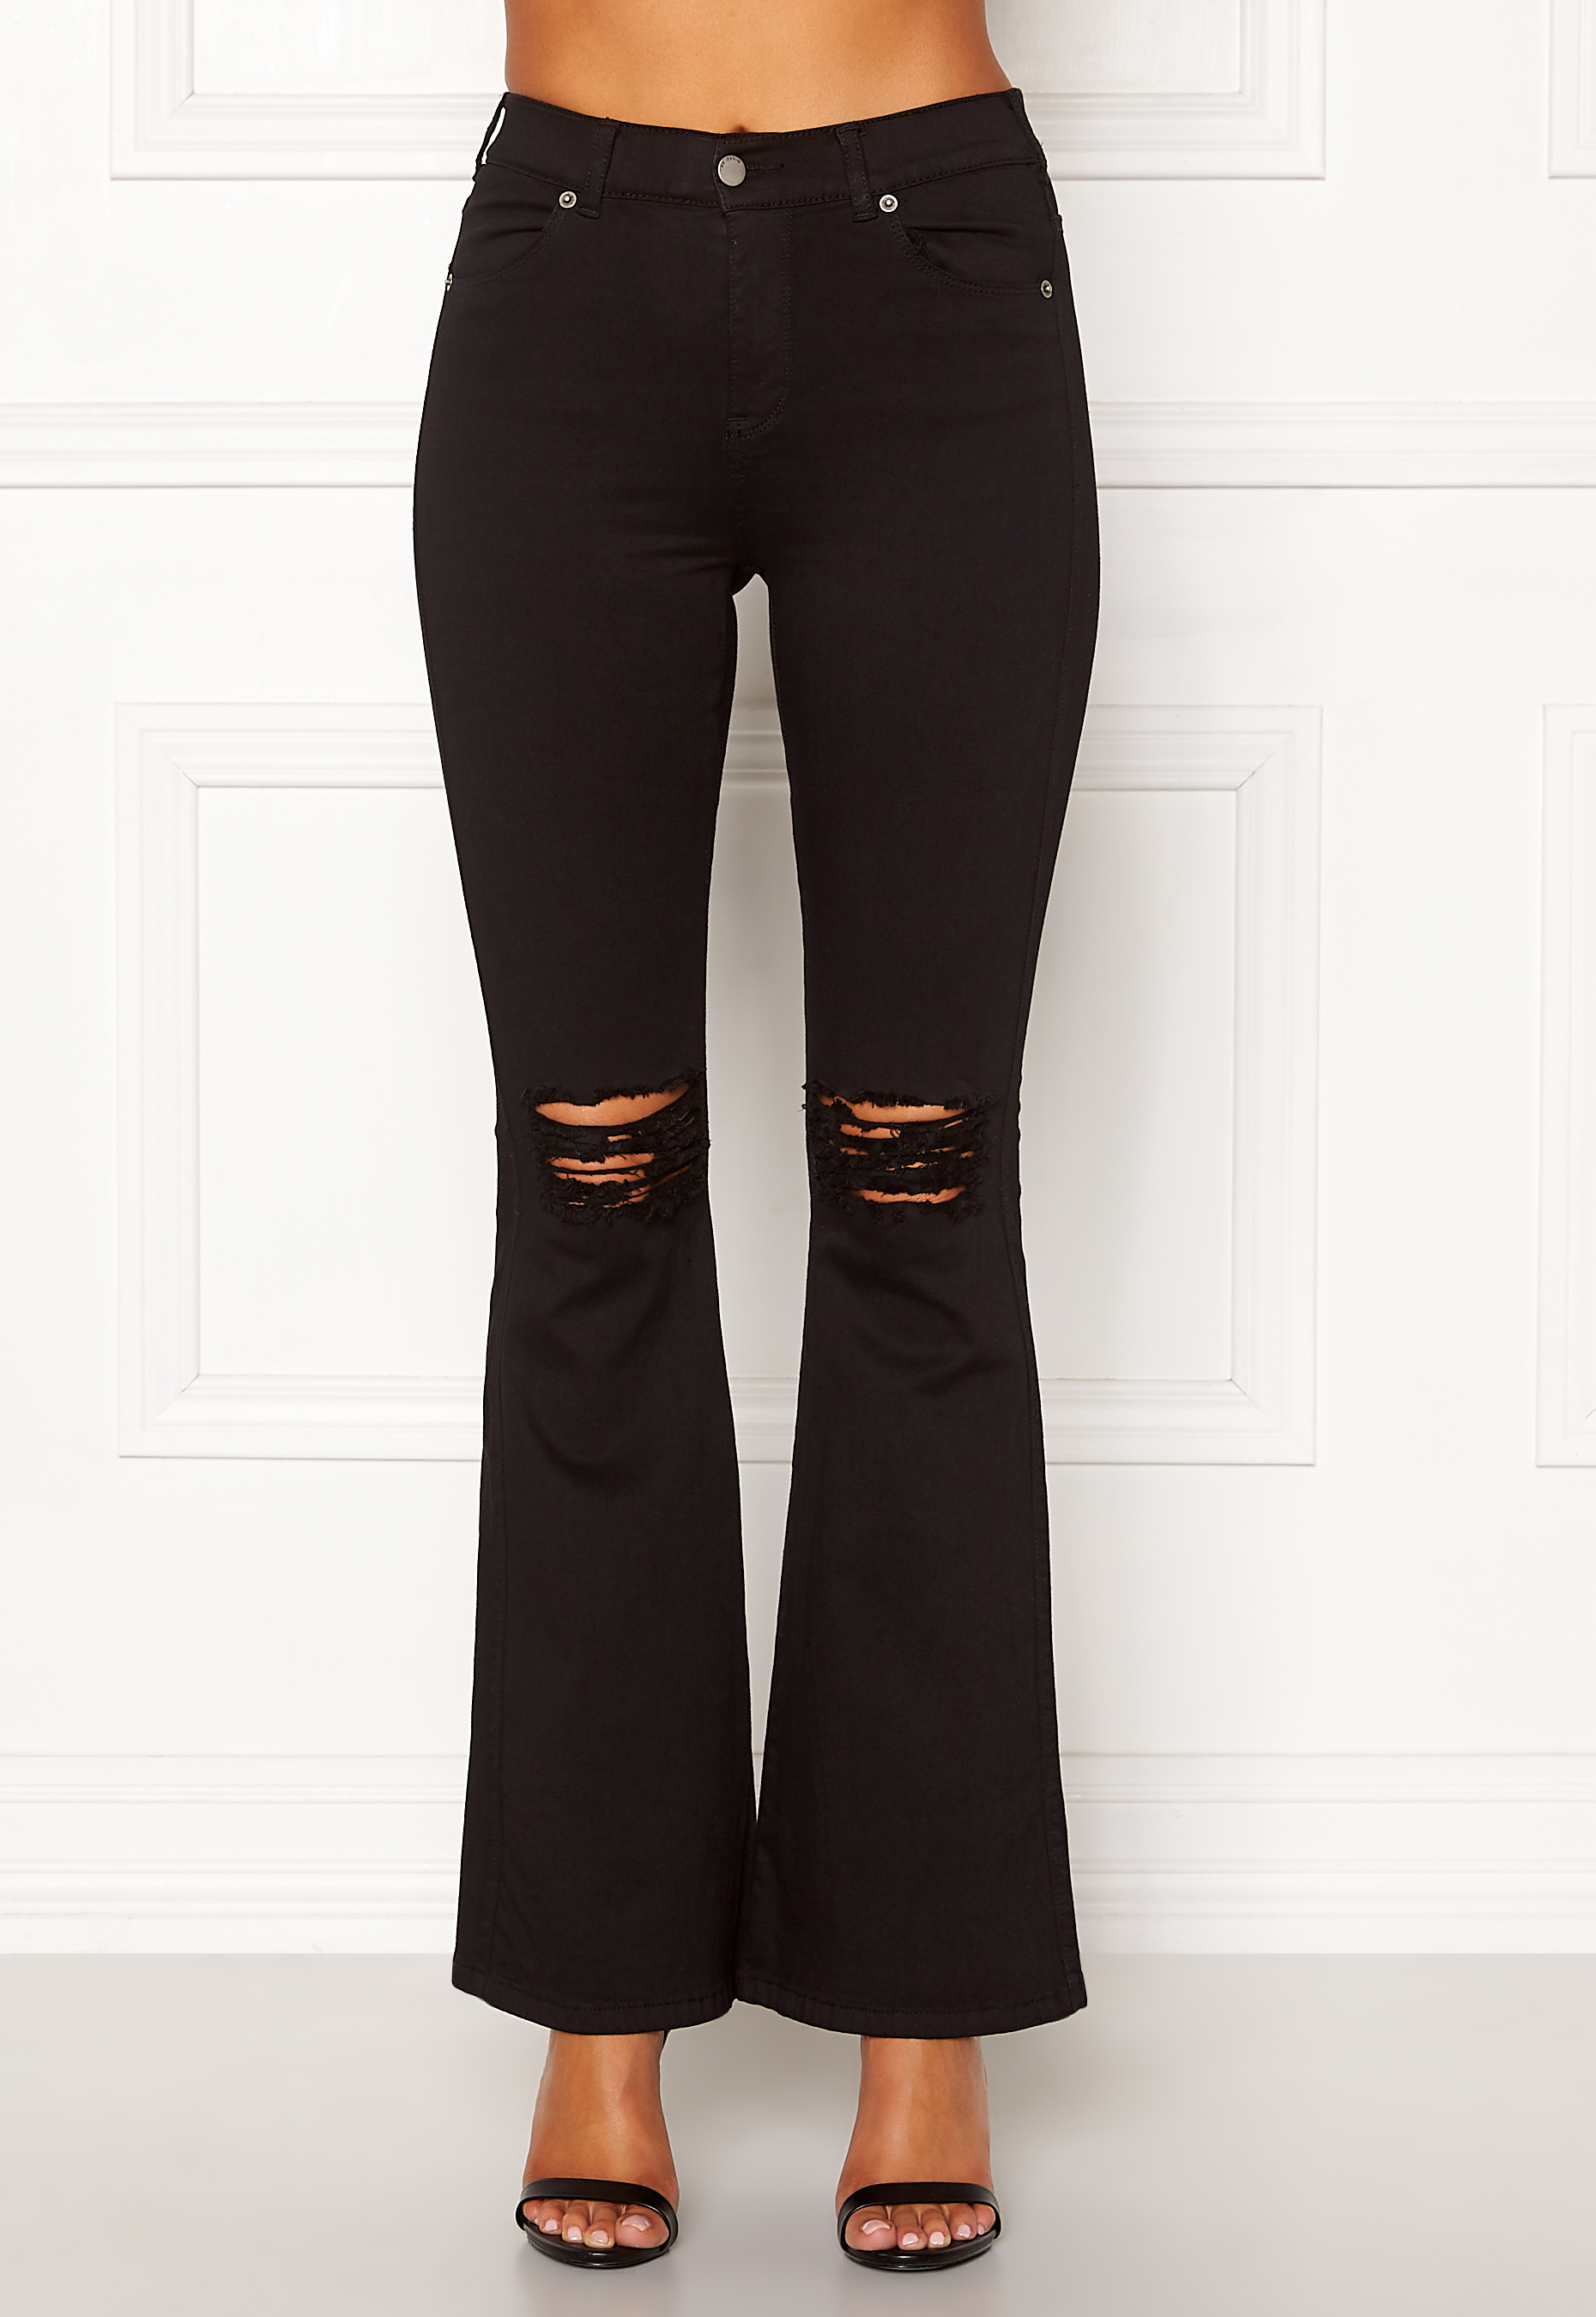 macy's black ripped jeans